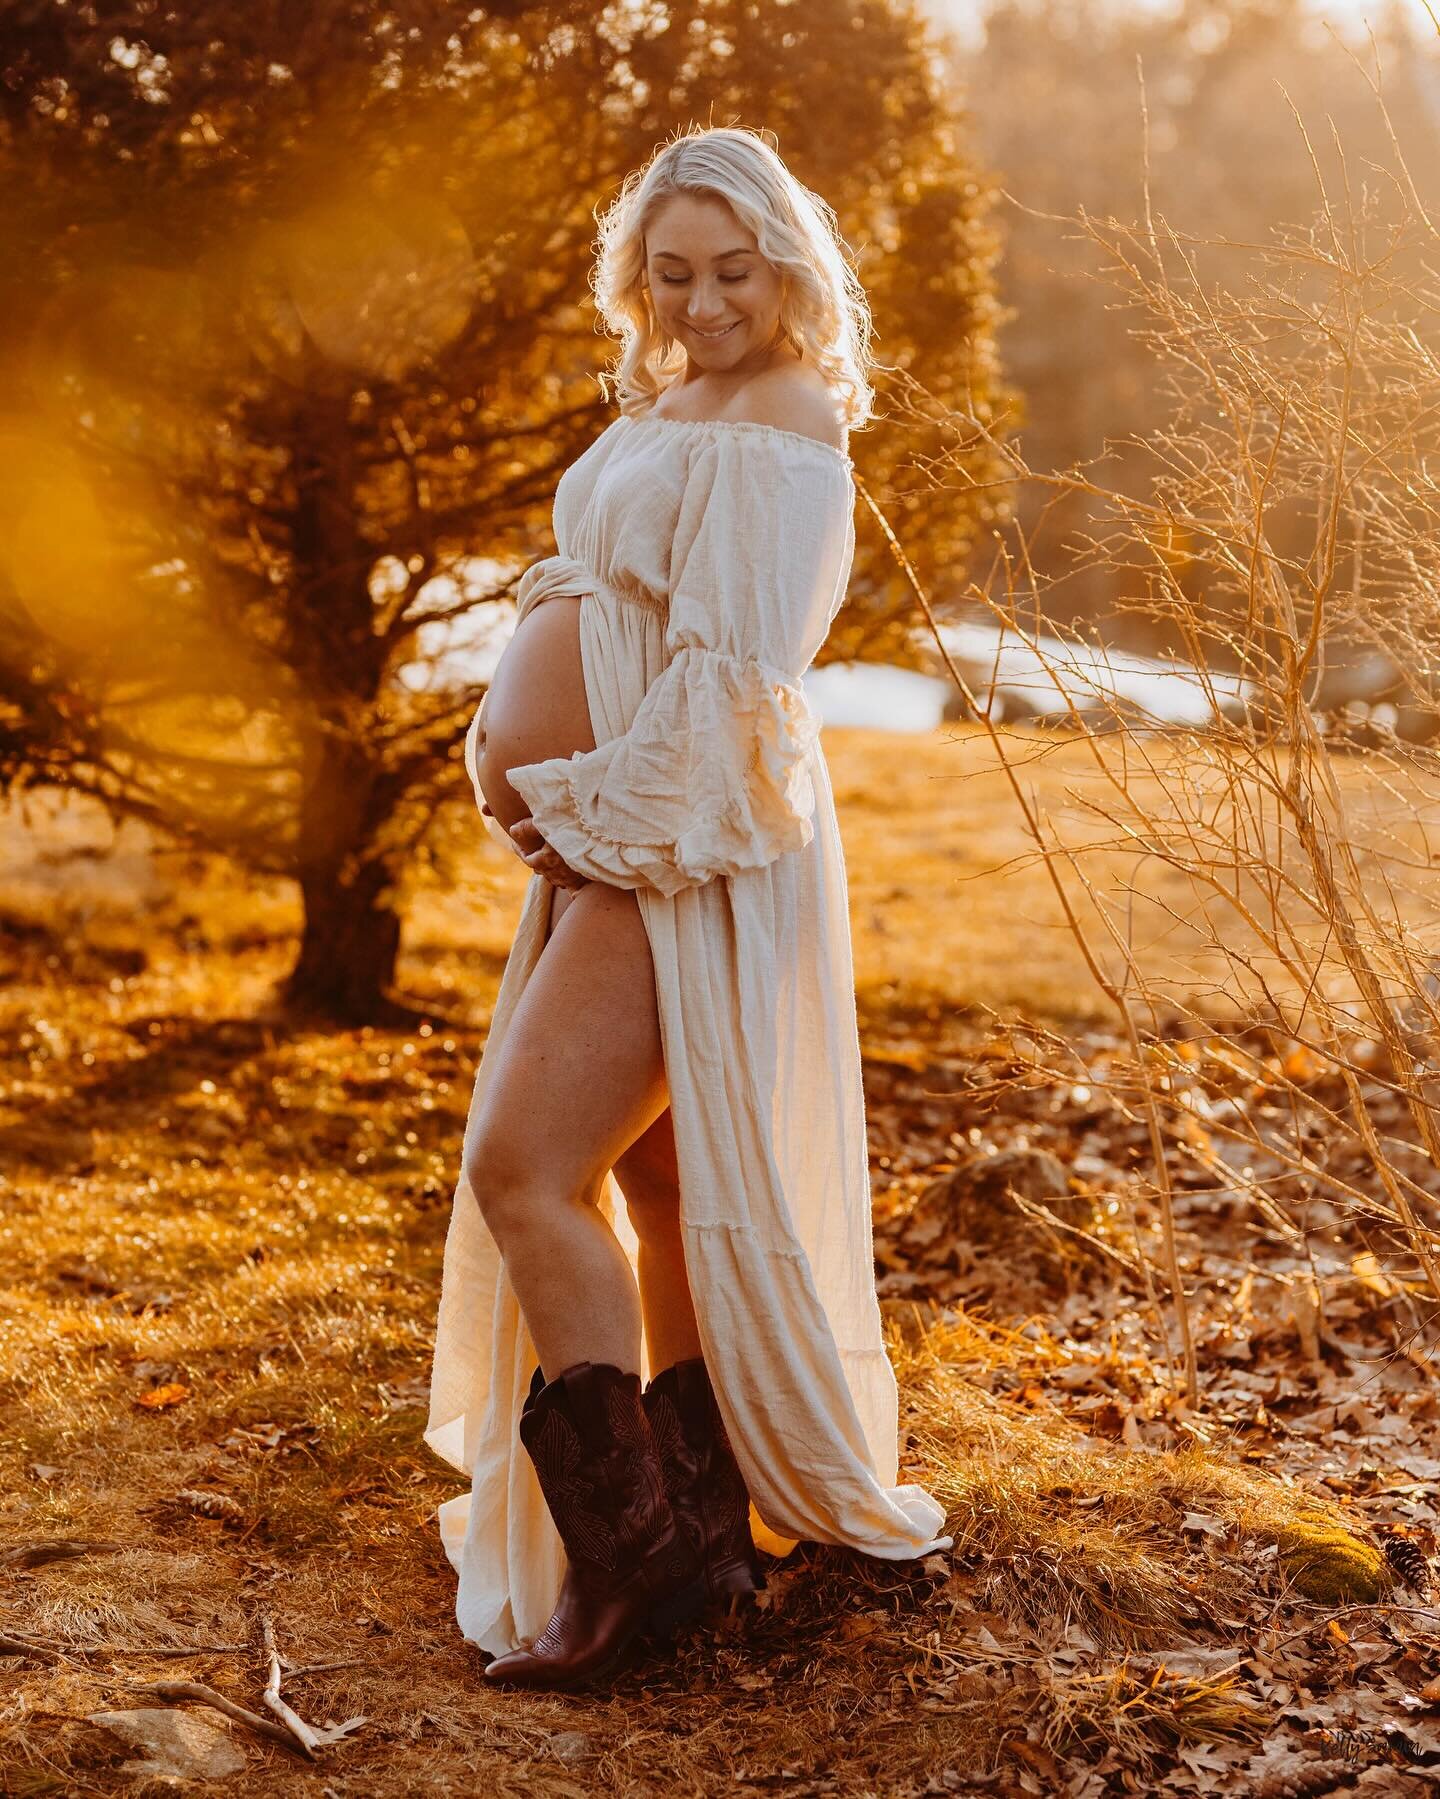 Blessing your feed with this glowing mama to be! ✨ @kayla.marie.samia || can&rsquo;t wait to meet my nephew! 
&bull;
&bull;
&bull; 
#kellysamiaphotography #maternity #kellysamiaphoto #canon #photoshoot #goldenhour #beautiful #mama #bookingnow #rf #pe